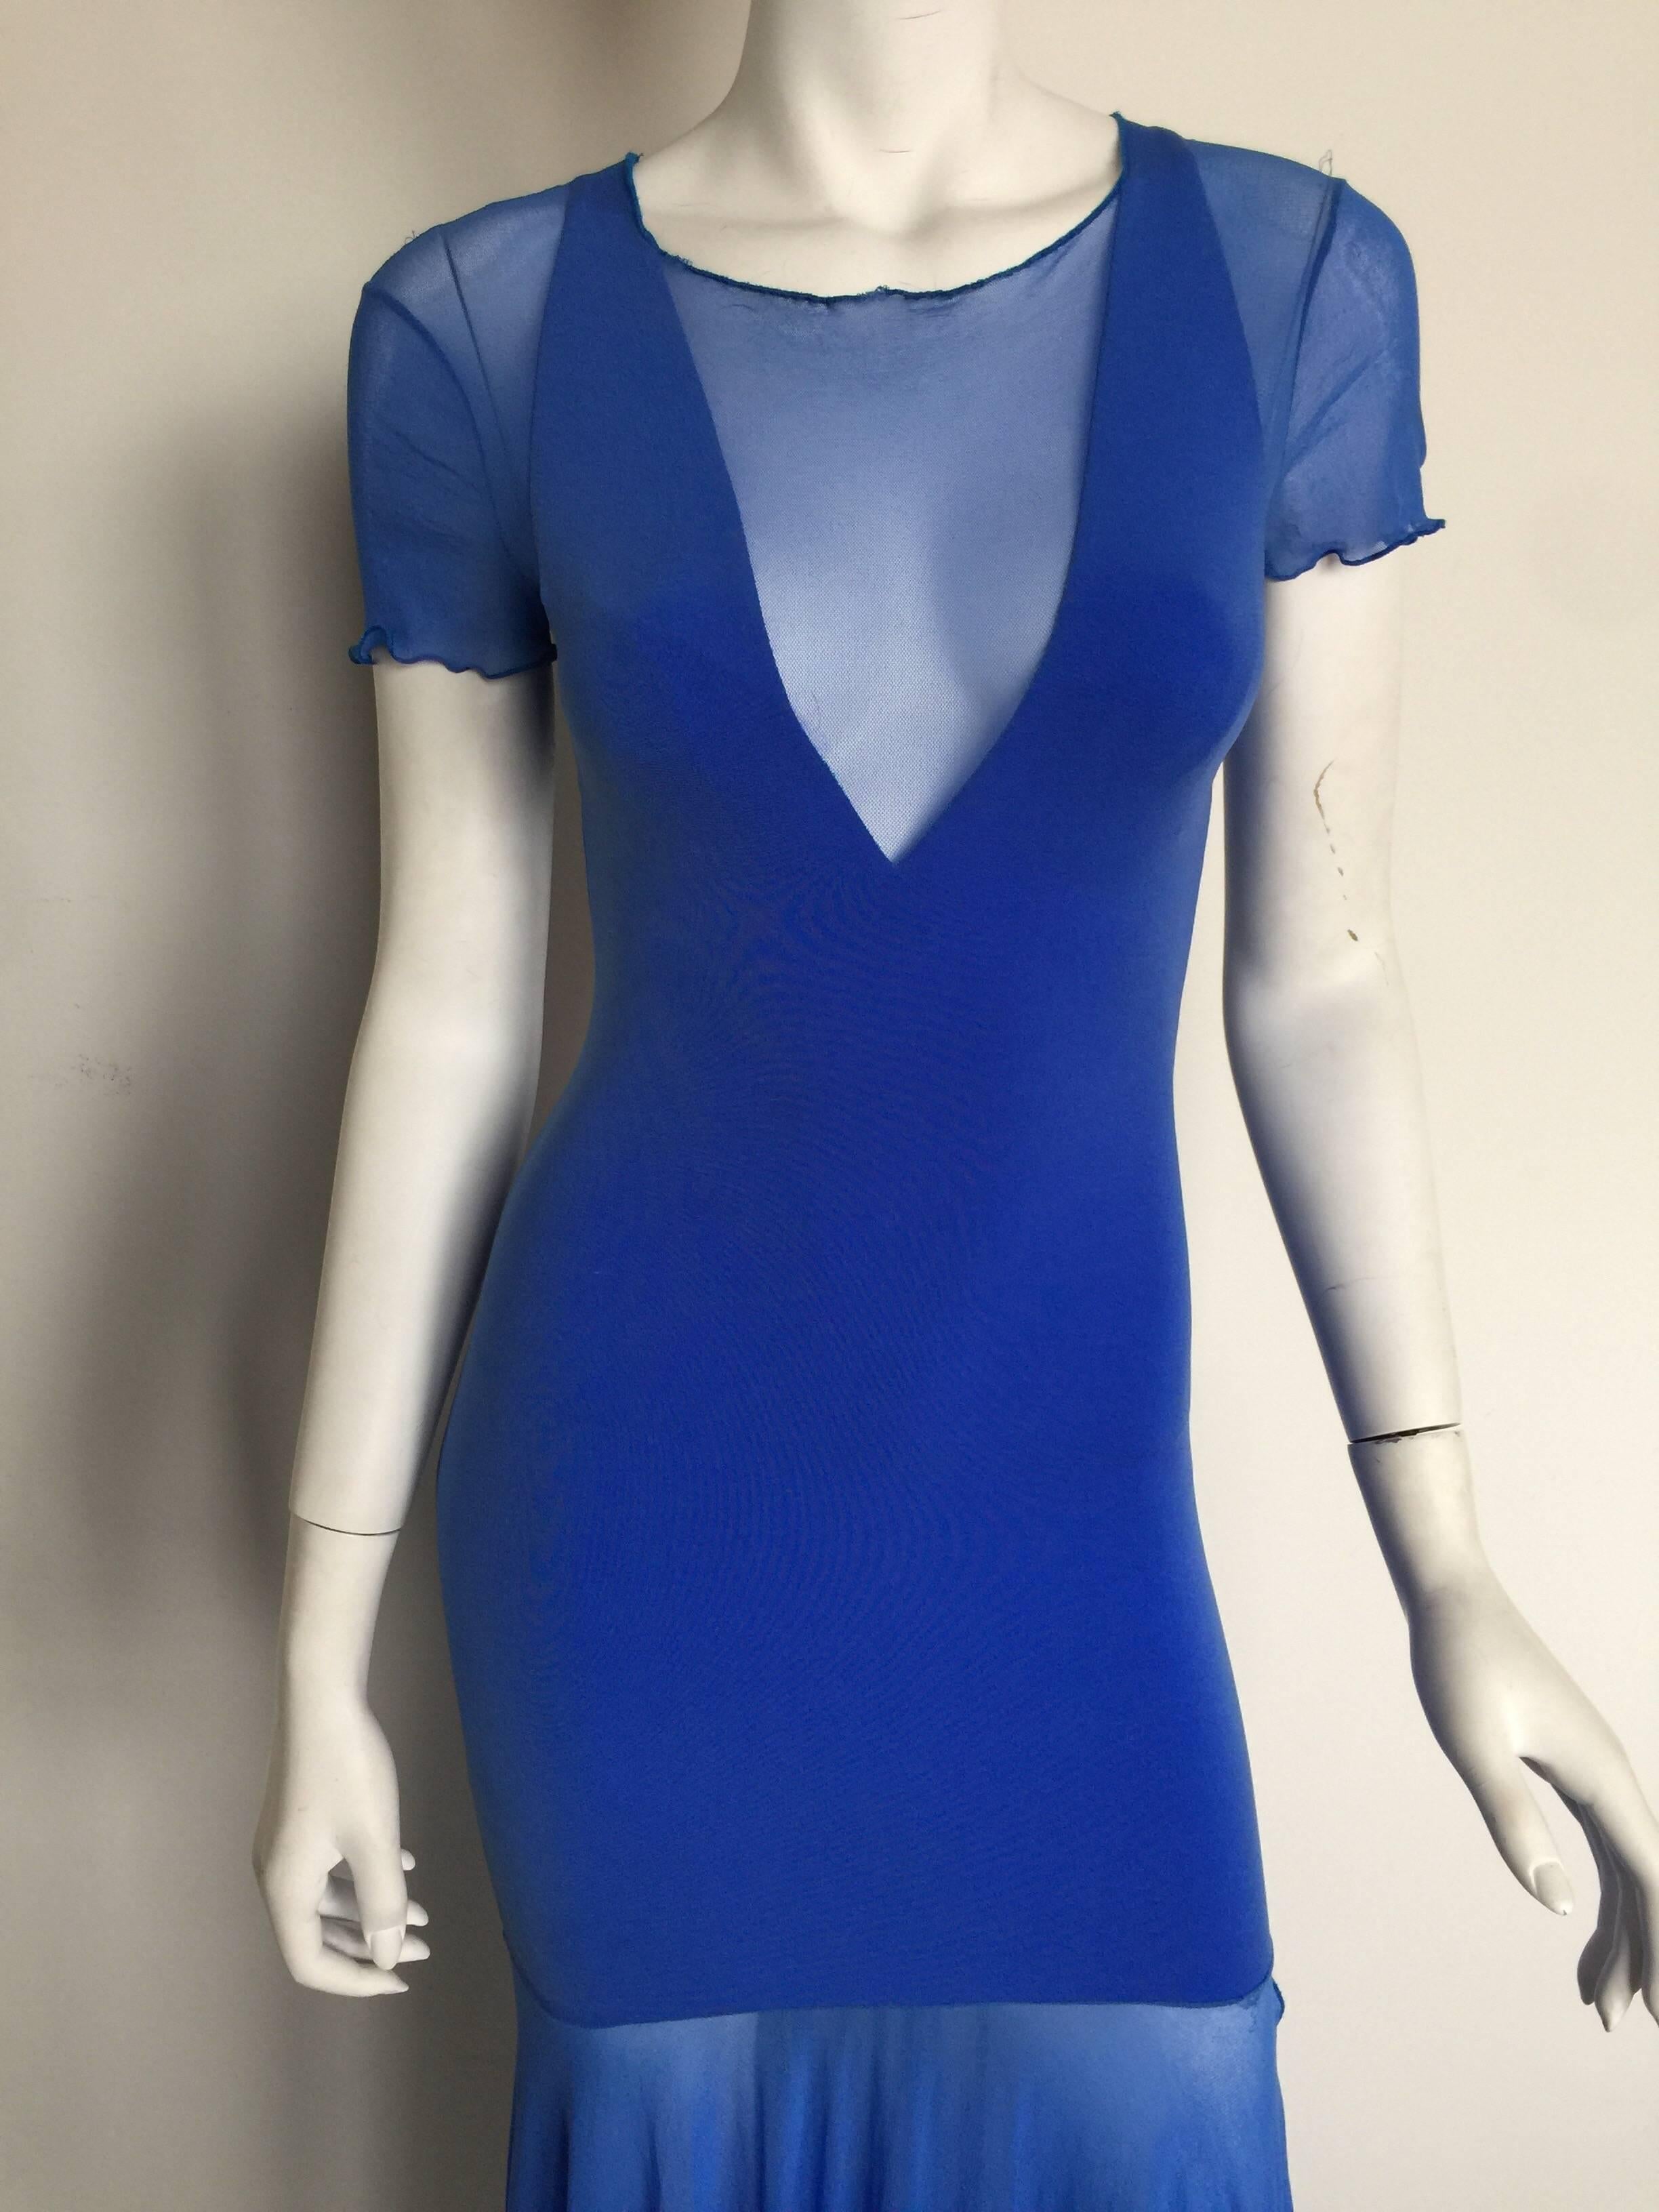 This Karl Lagerfeld sexy statement dress is from the 1980s.  It is form fitting with a deep V neckline and a scoop back.  It has breast pads that can be easily removed or kept for a little extra coverage.  The fabric has a lot of stretch so would